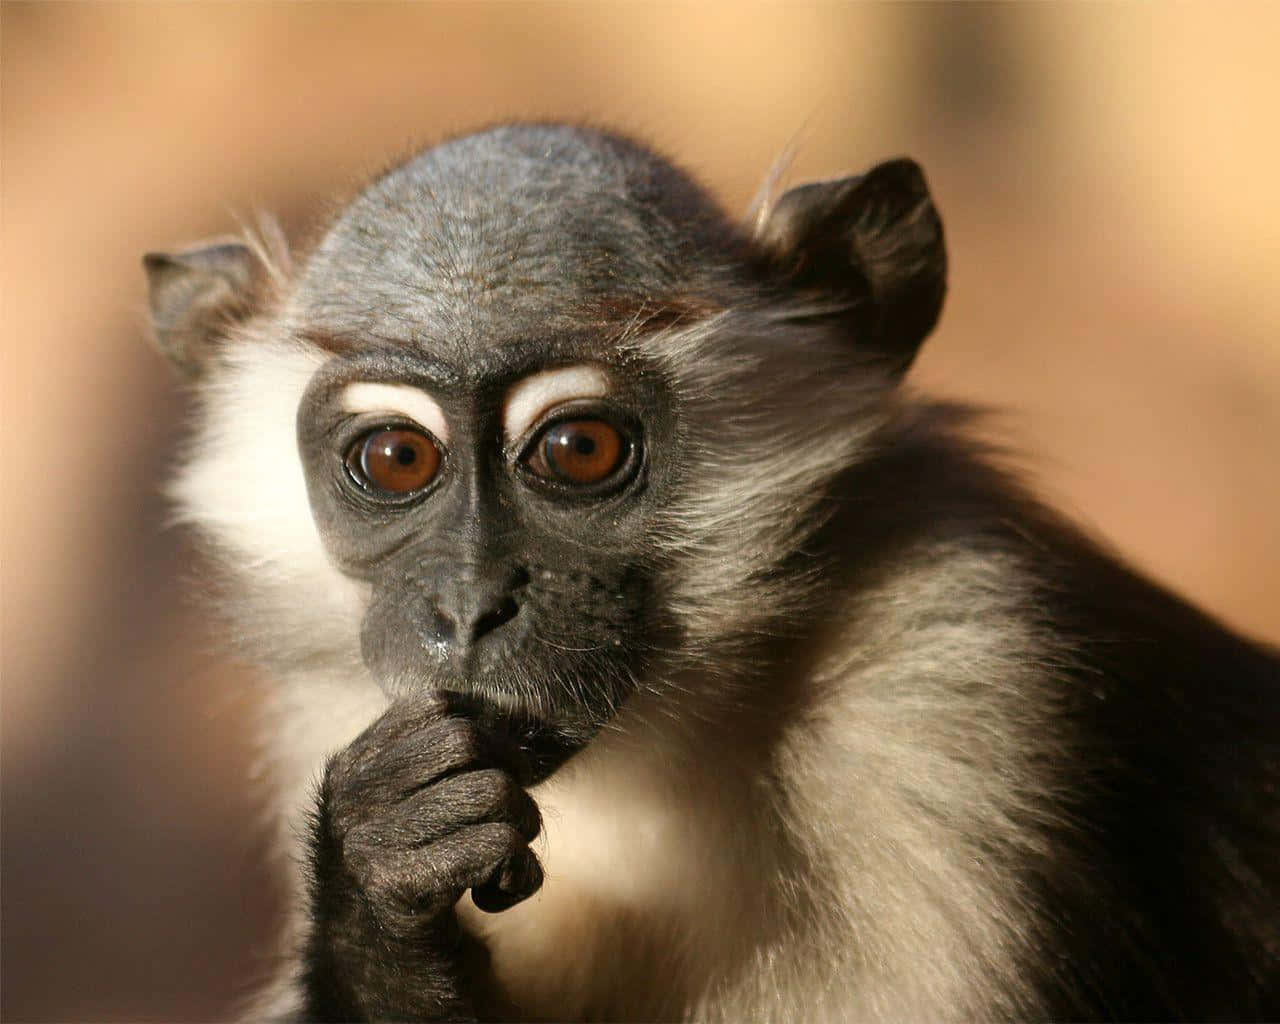 A Monkey With Its Mouth Open Is Looking At Something